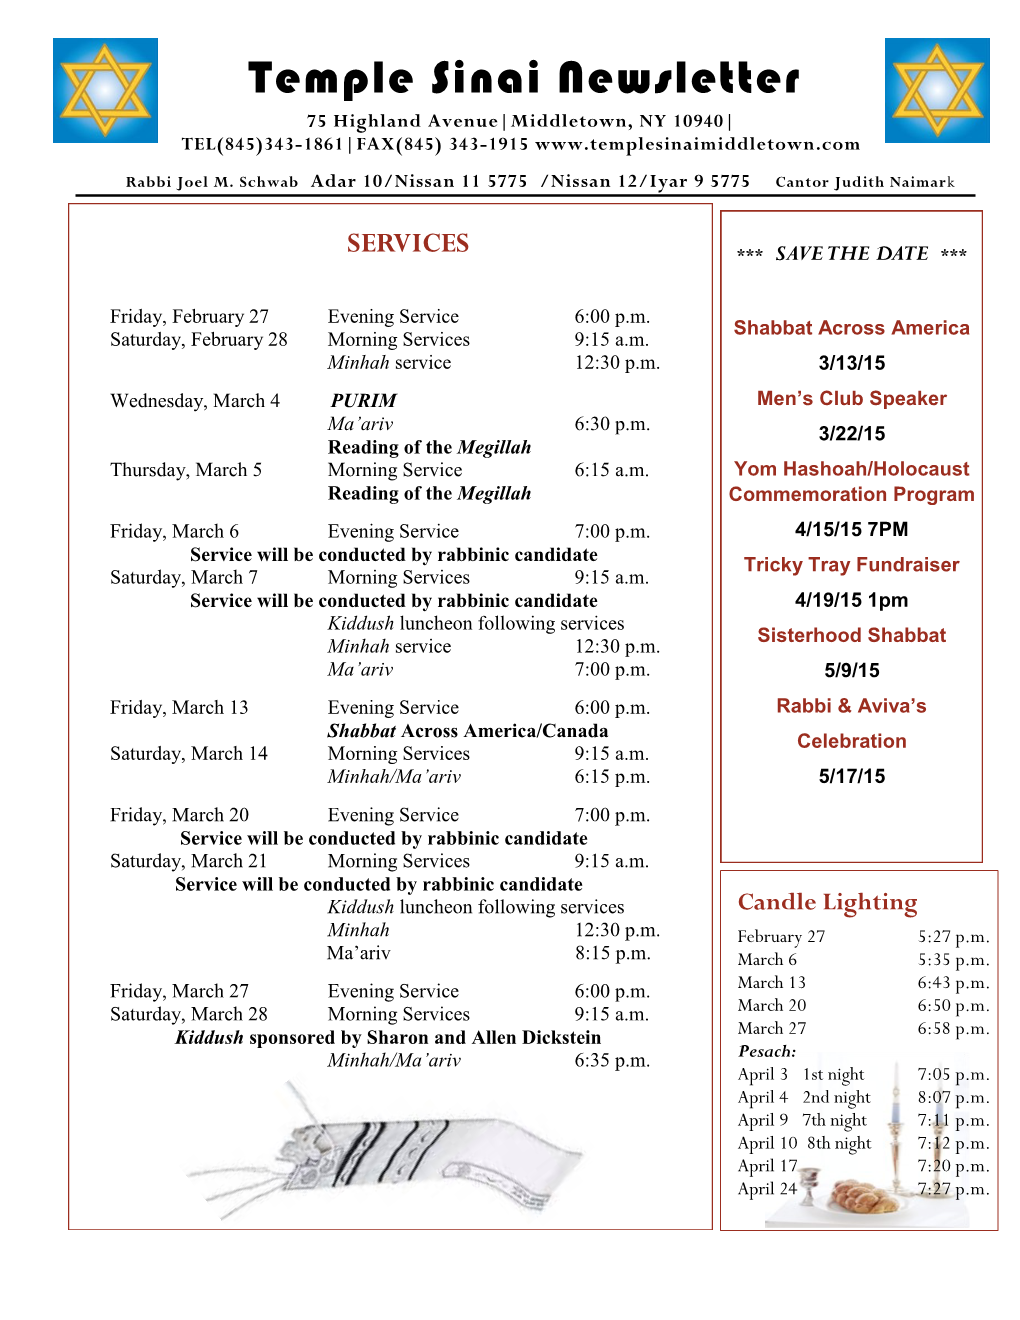 Temple Sinai Newsletter 75 Highland Avenue|Middletown, NY 10940| TEL(845)343-1861|FAX(845) 343-1915